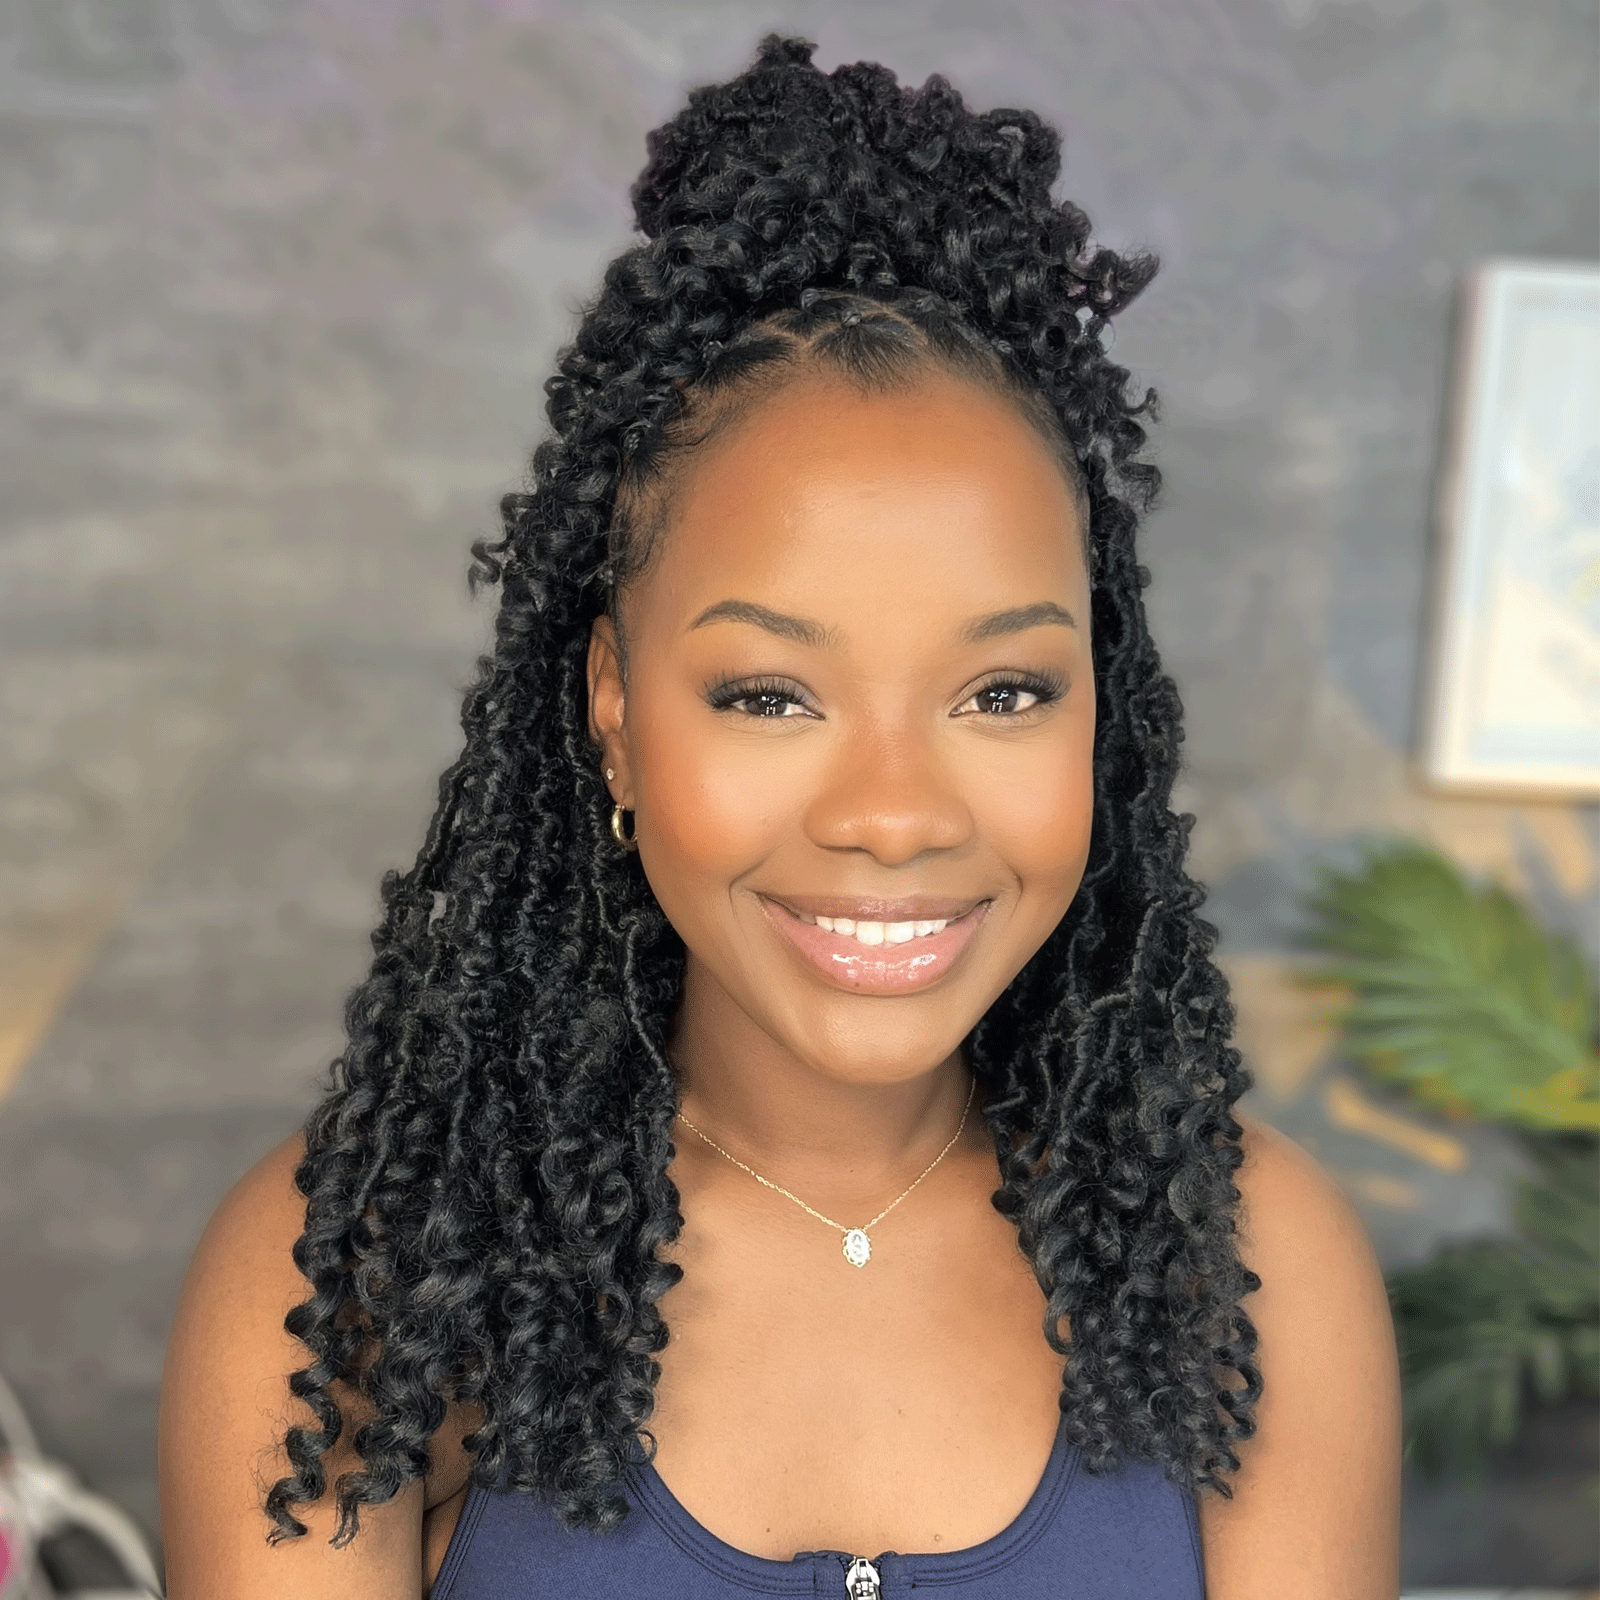 Toyotress Boho Butterfly Locs with Curl 12-18